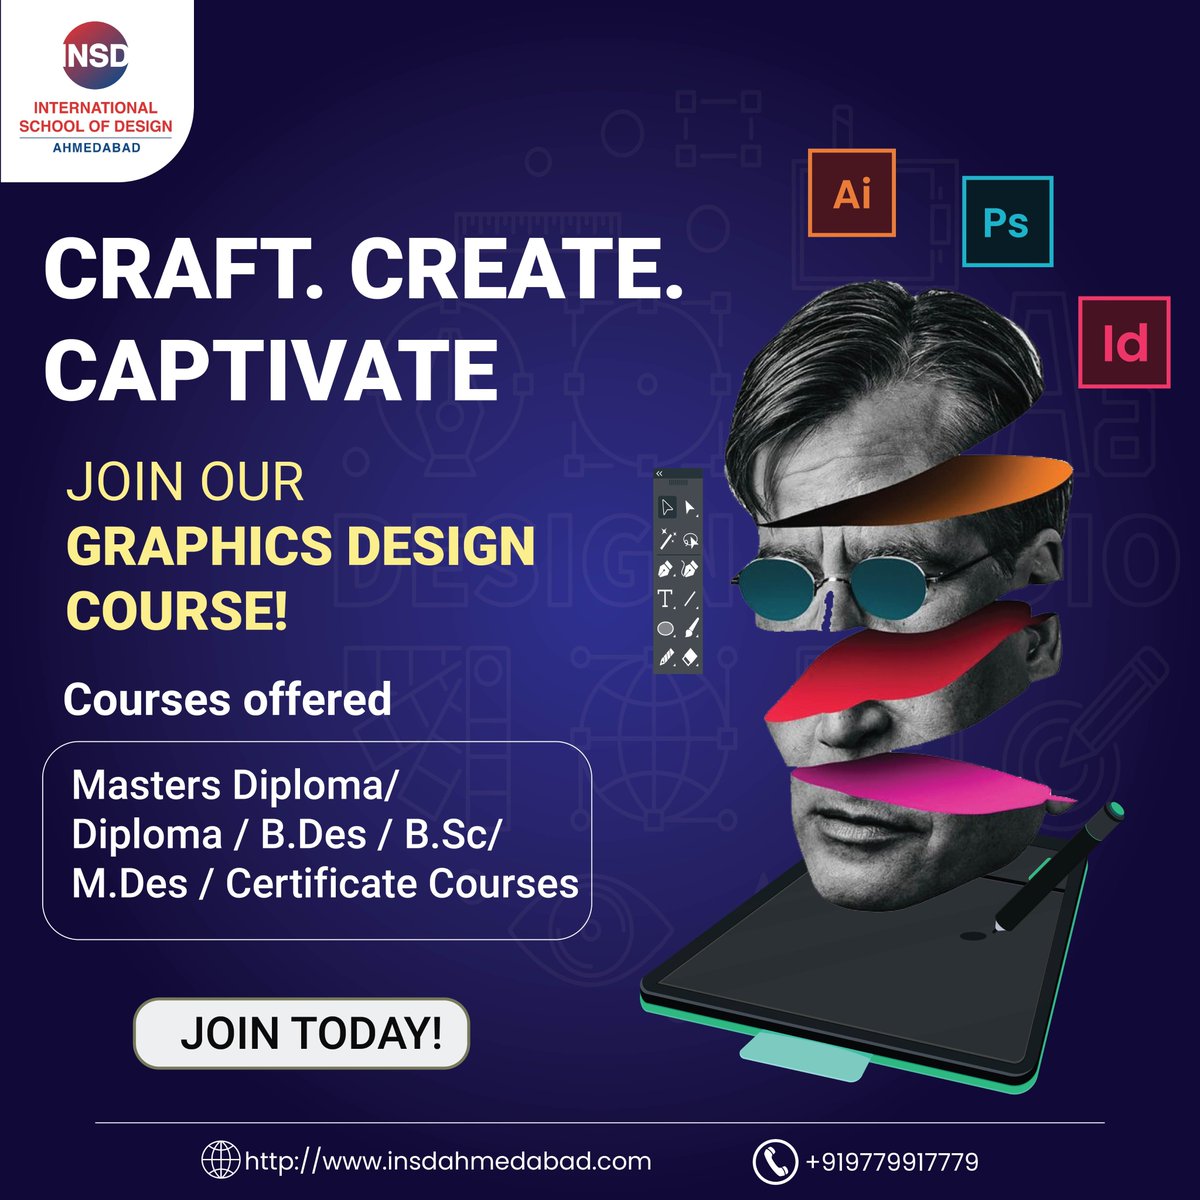 🎨 Unleash your creative potential in graphic design! 🌟 Immerse yourself in our curriculum covering design theory, digital illustration, branding, and visual storytelling. #graphicsdesign #graphicdesigner #illustrator #photoshop #adobeillustrator #adobe #designschool